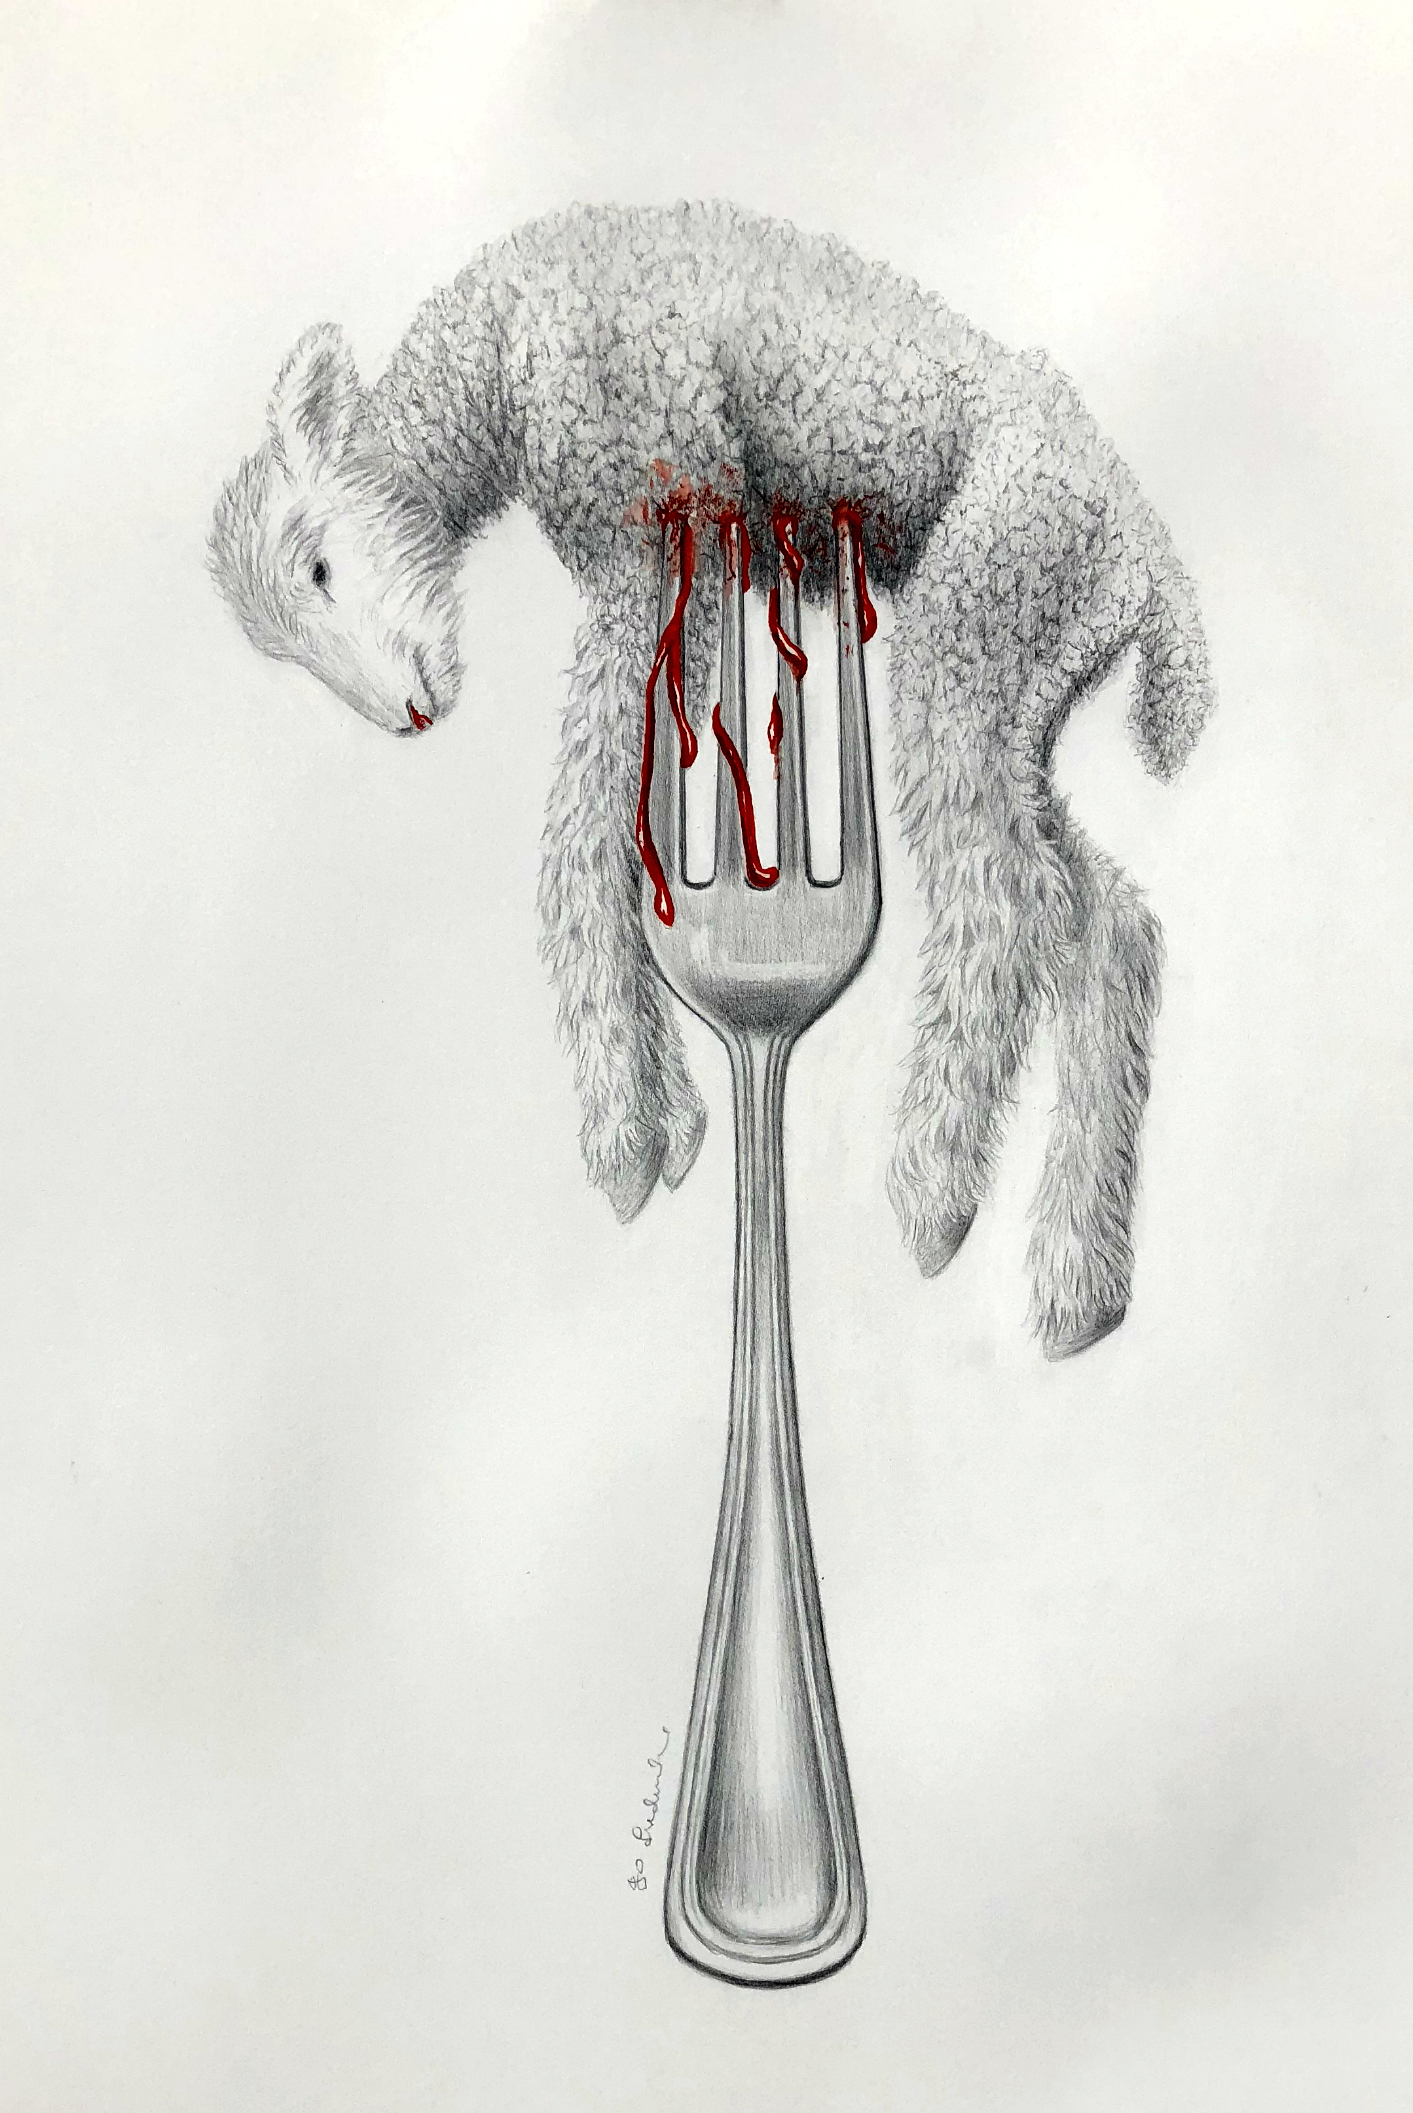 Jo Frederiks - The horror story on your dinner plate